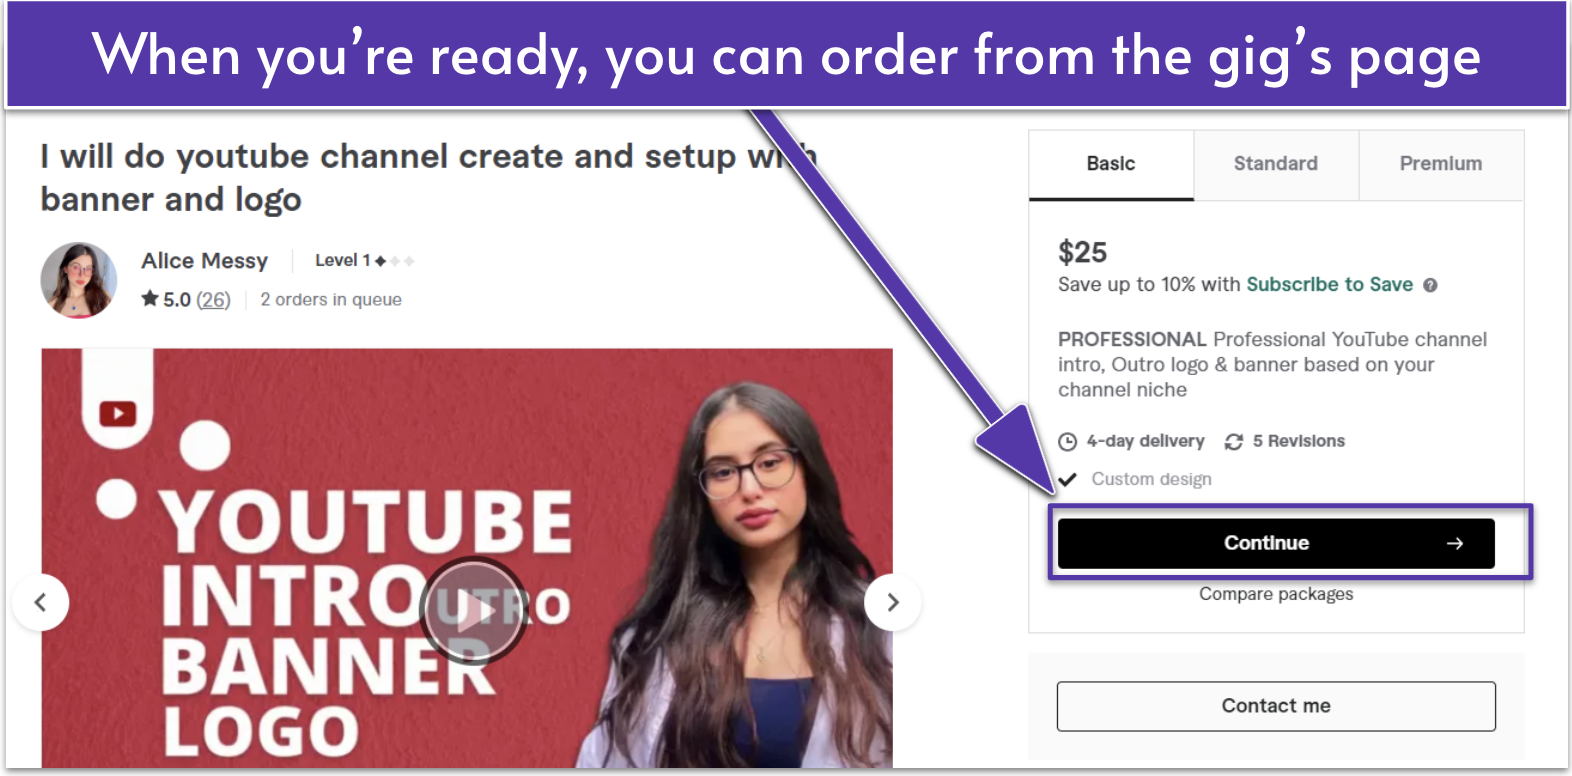 The "Continue" button highlighted on a YouTube expert's gig page on Fiverr